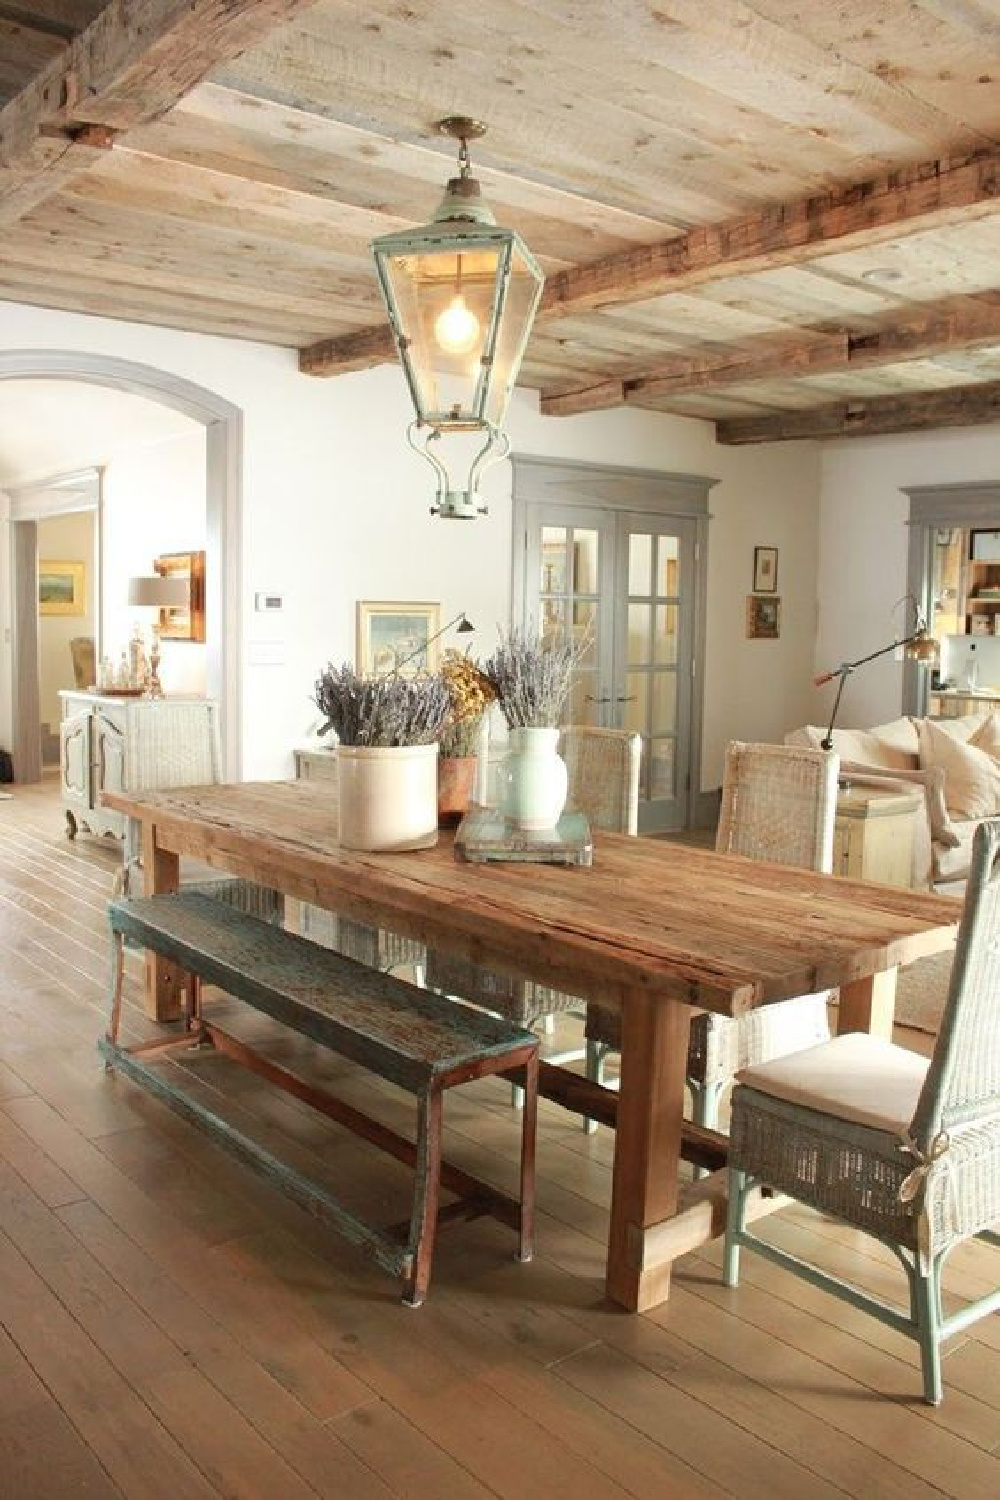 Rustic elegance and uncluttered country decor sing in a French Nordic Farmhouse dining room with knotty wood ceiling and antique lantern. See more European inspired country decor in the story. #FrenchCountry #FrenchNordic #countrydecor 